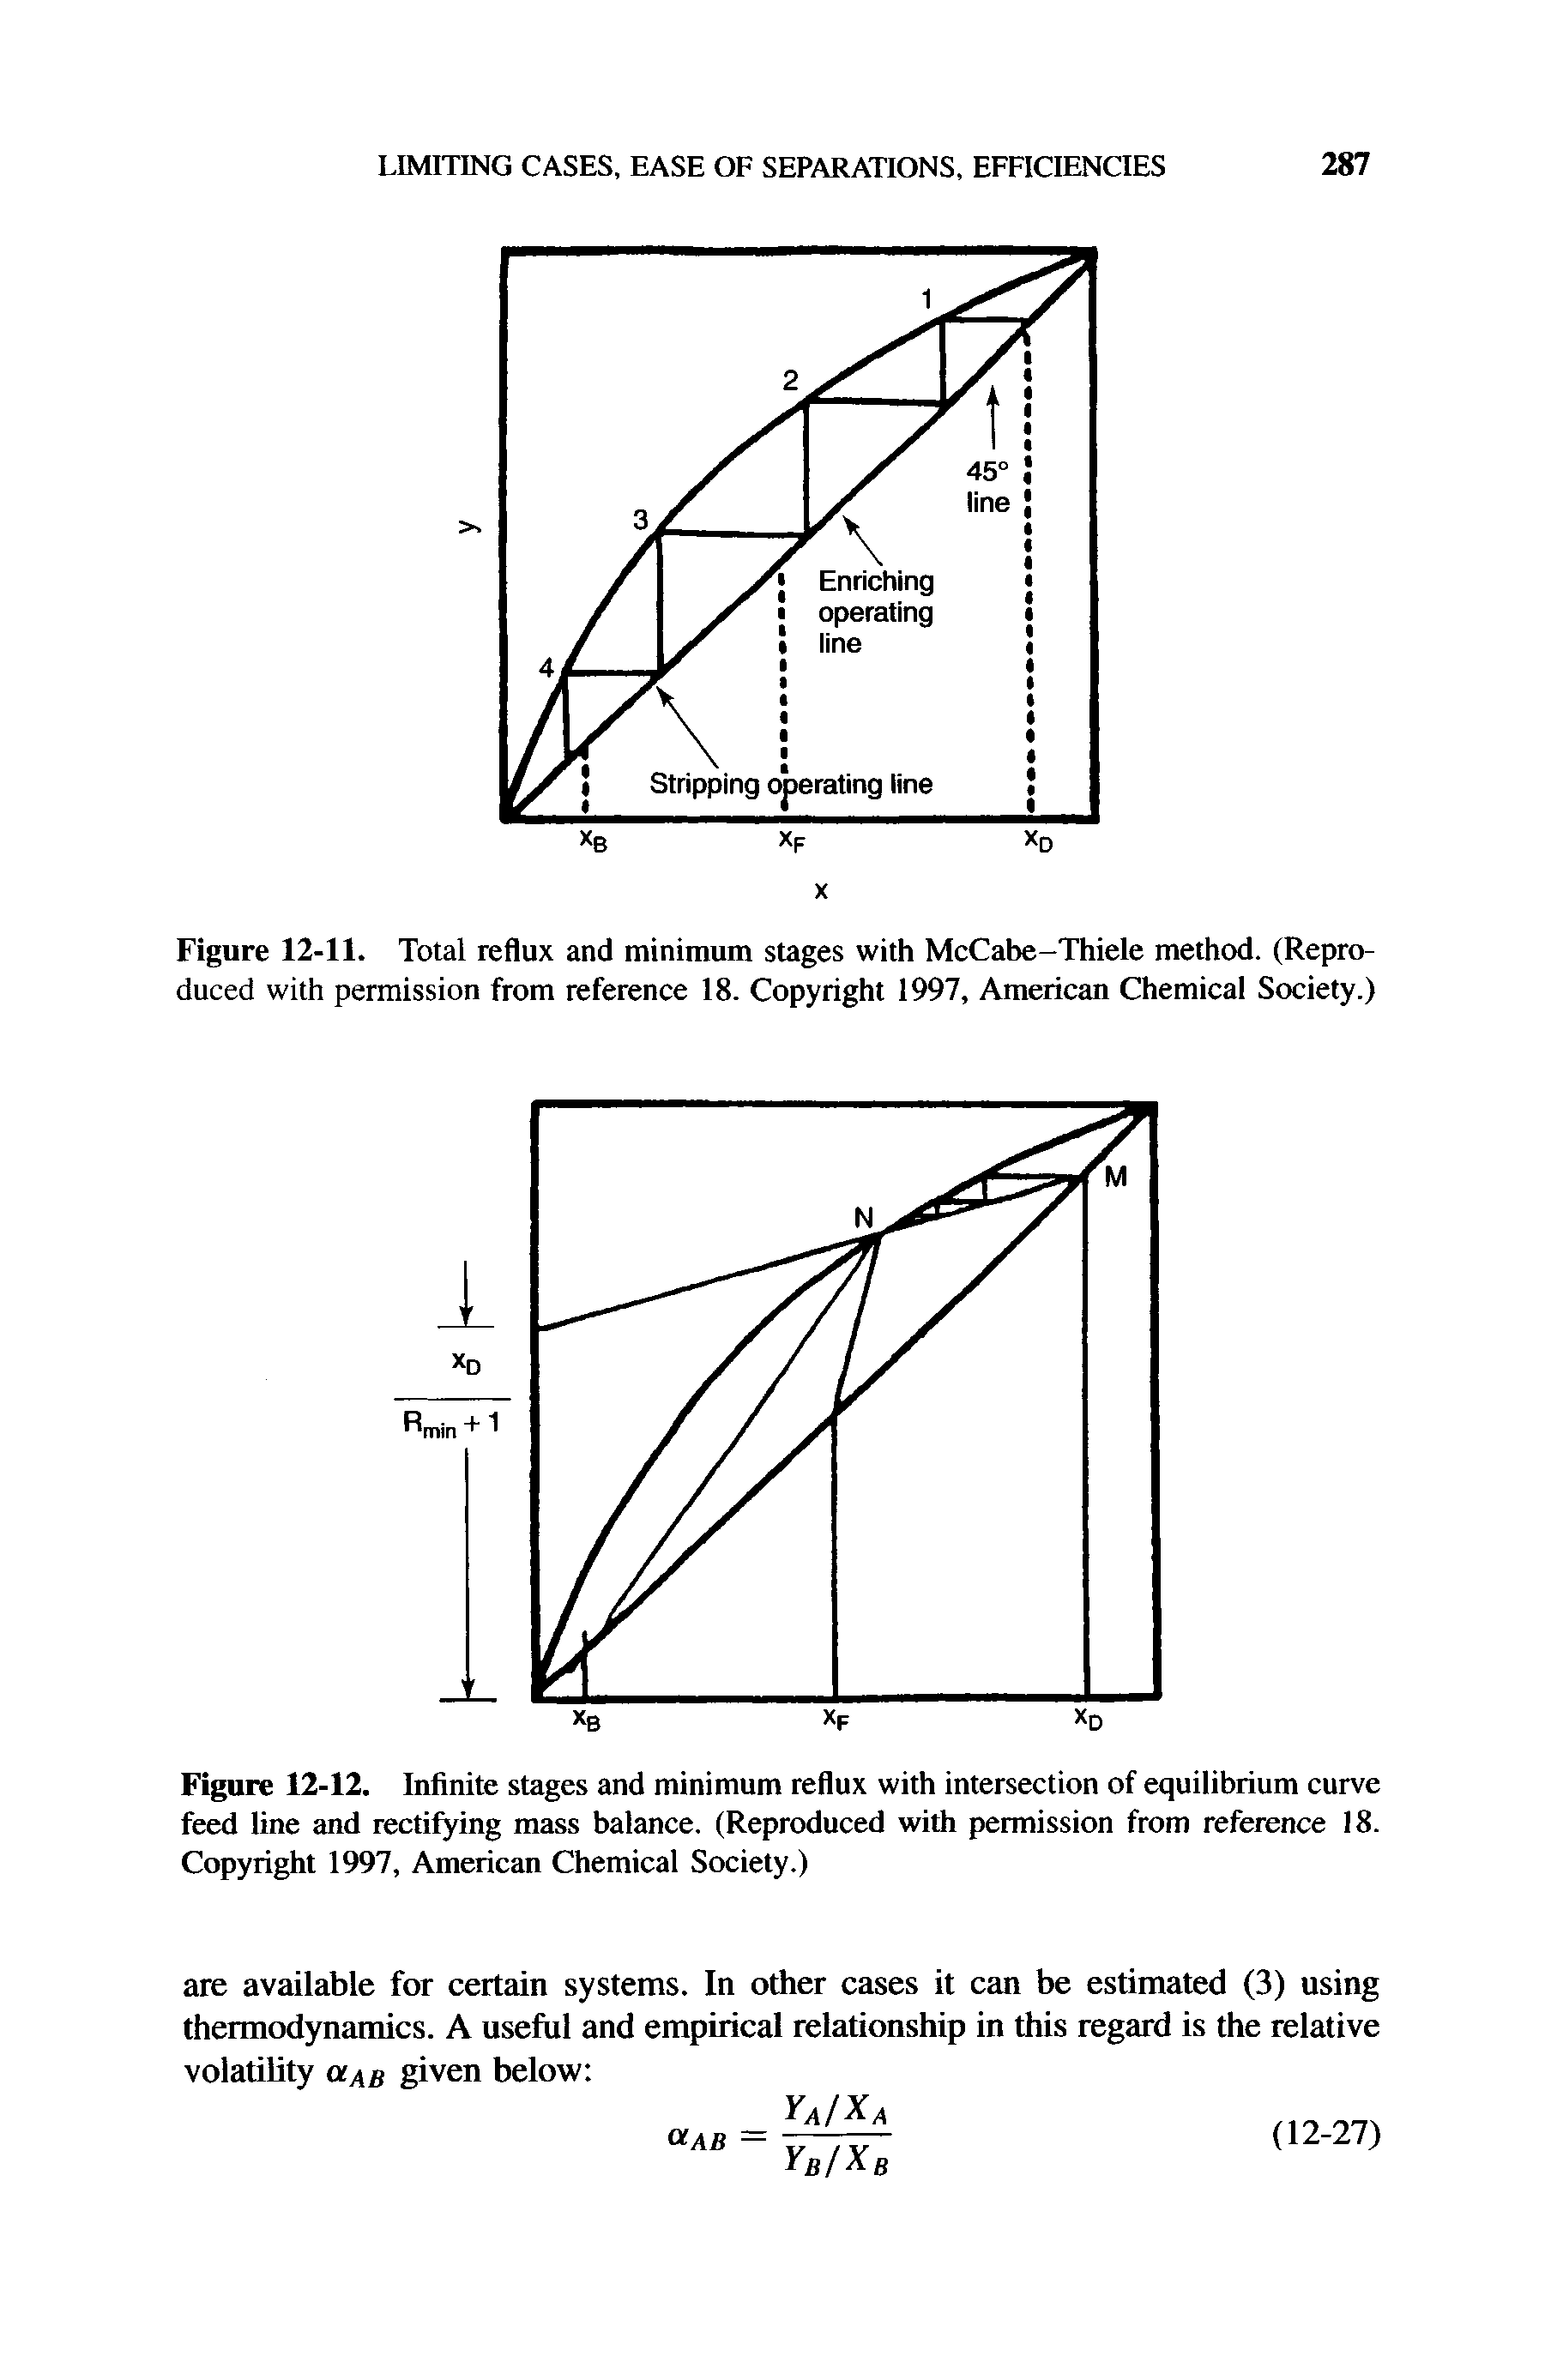 Figure 12-11. Total reflux and minimum stages with McCabe-Thiele method. (Reproduced with permission from reference 18. Copyright 1997, American Chemical Society.)...